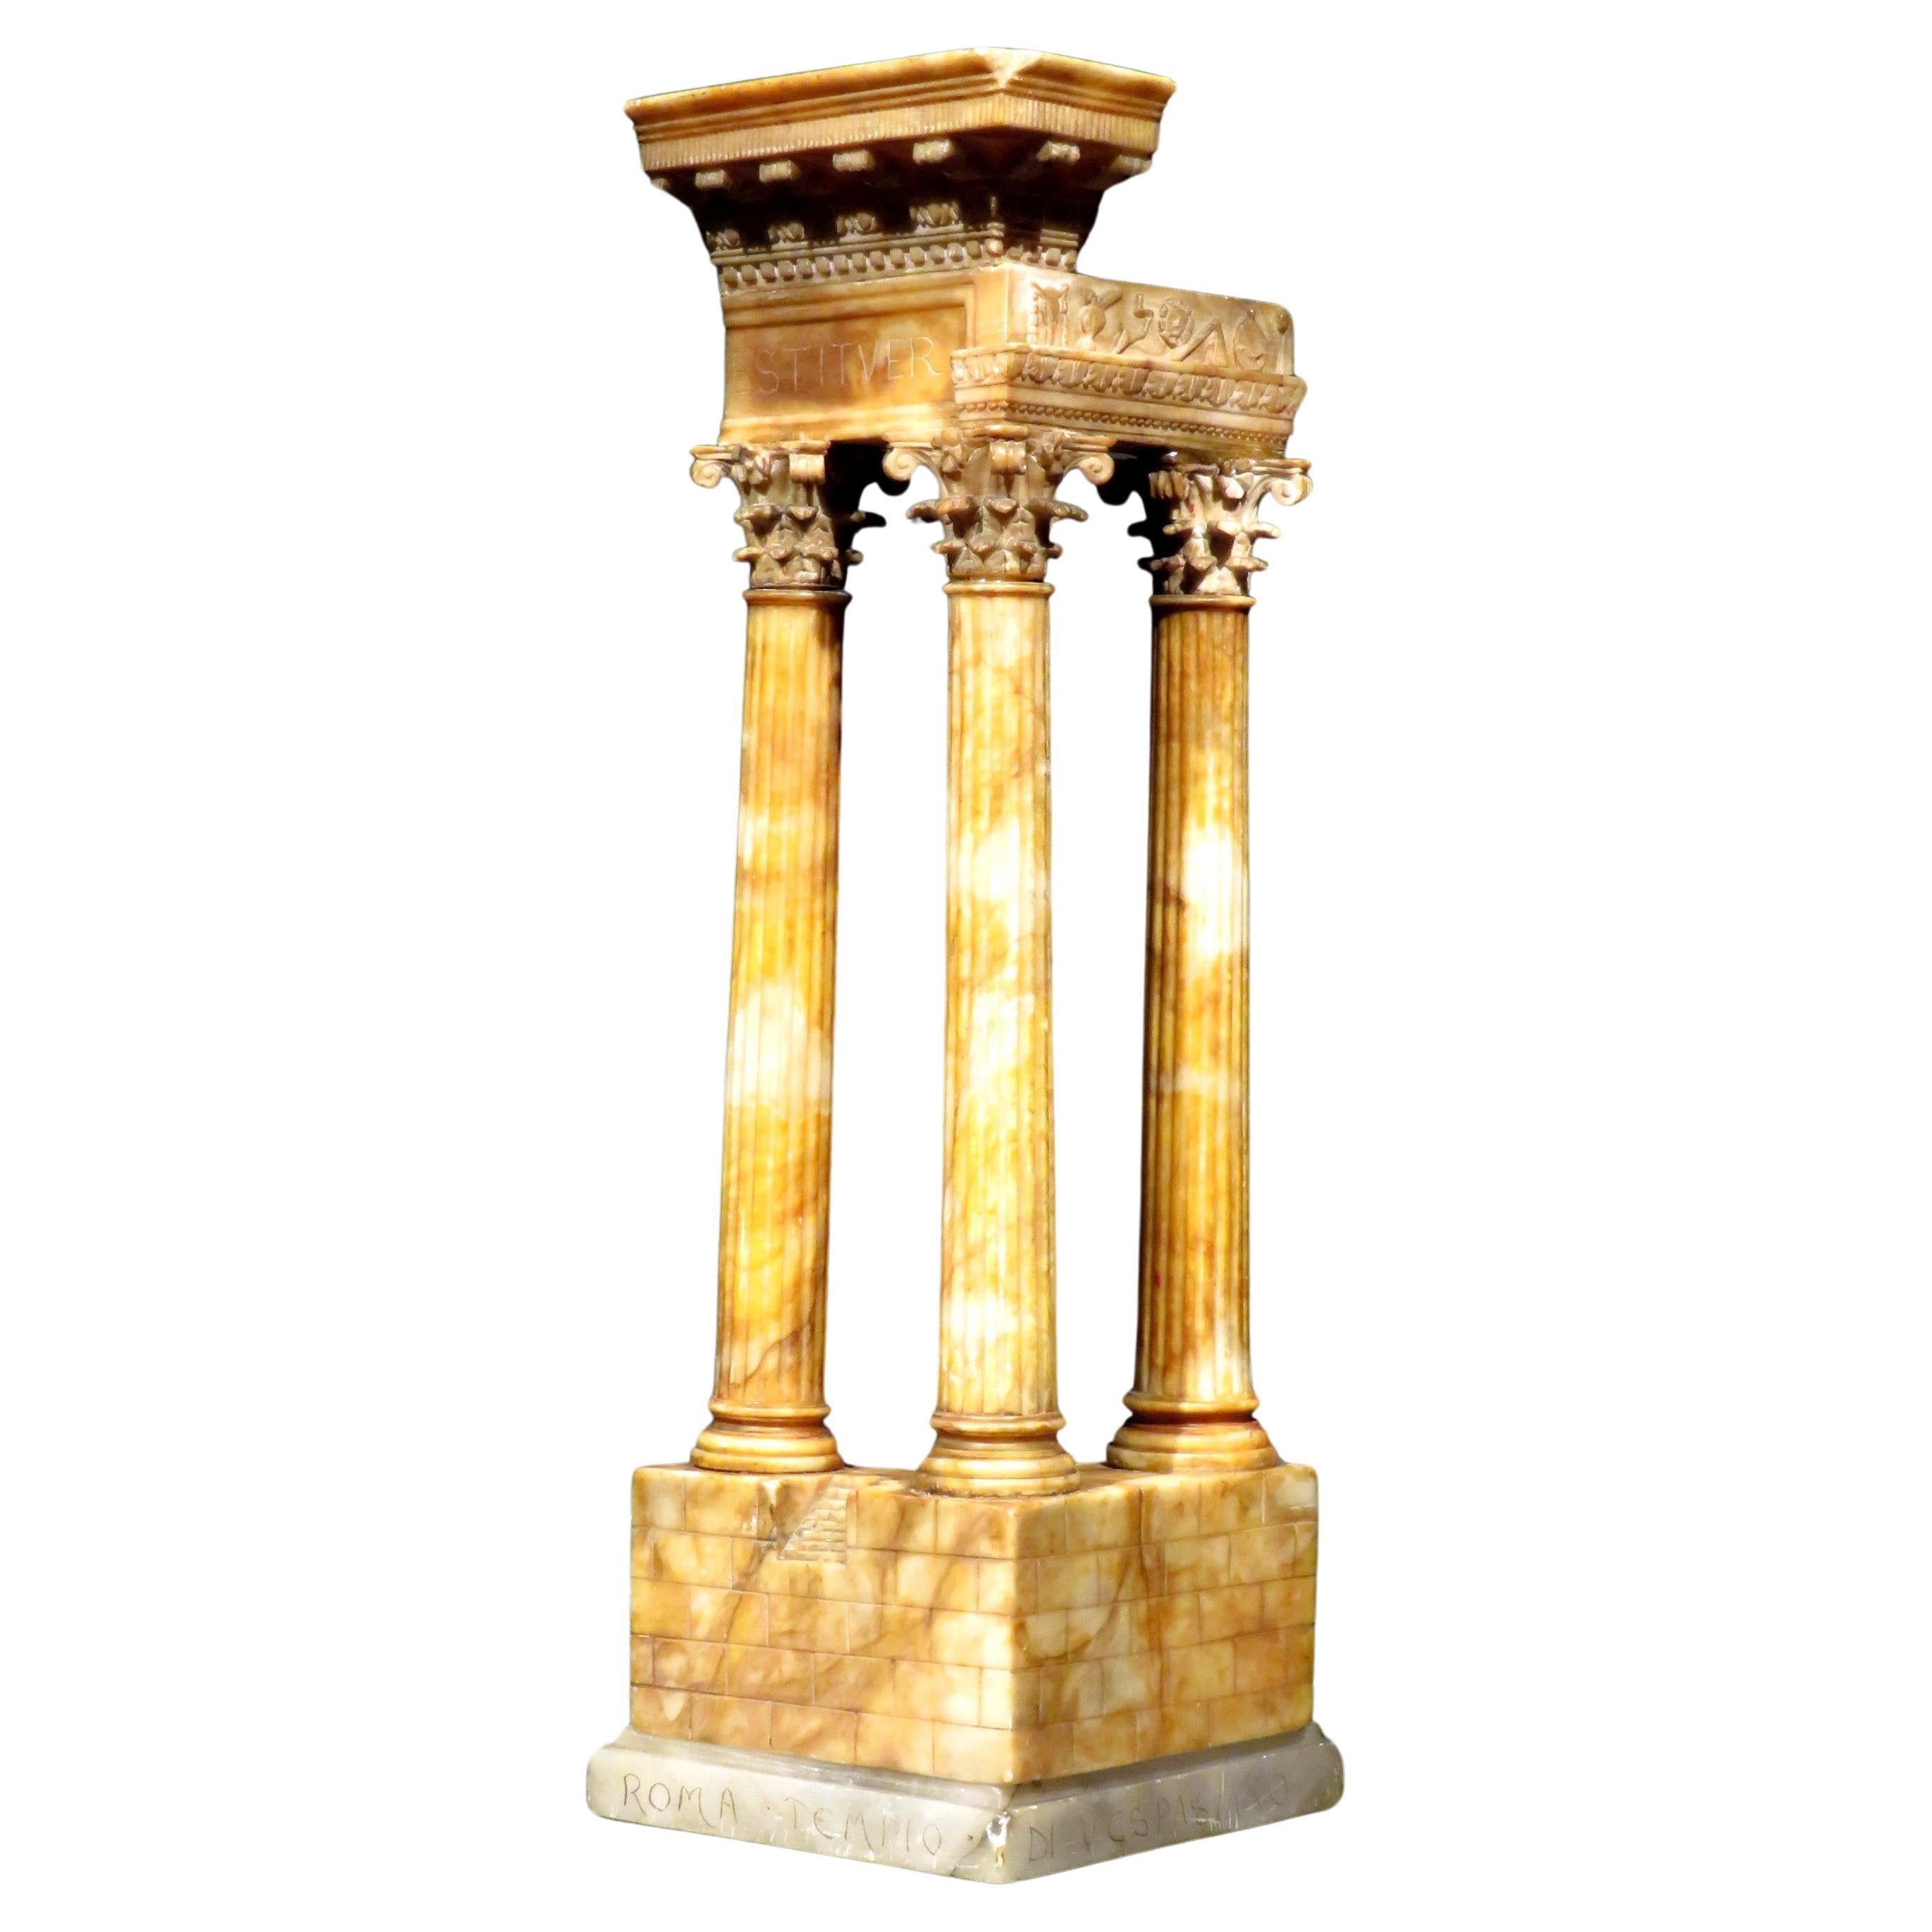 A Finely Sculpted Grand Tour Style Model of The Temple of Vespasian, Circa 1900